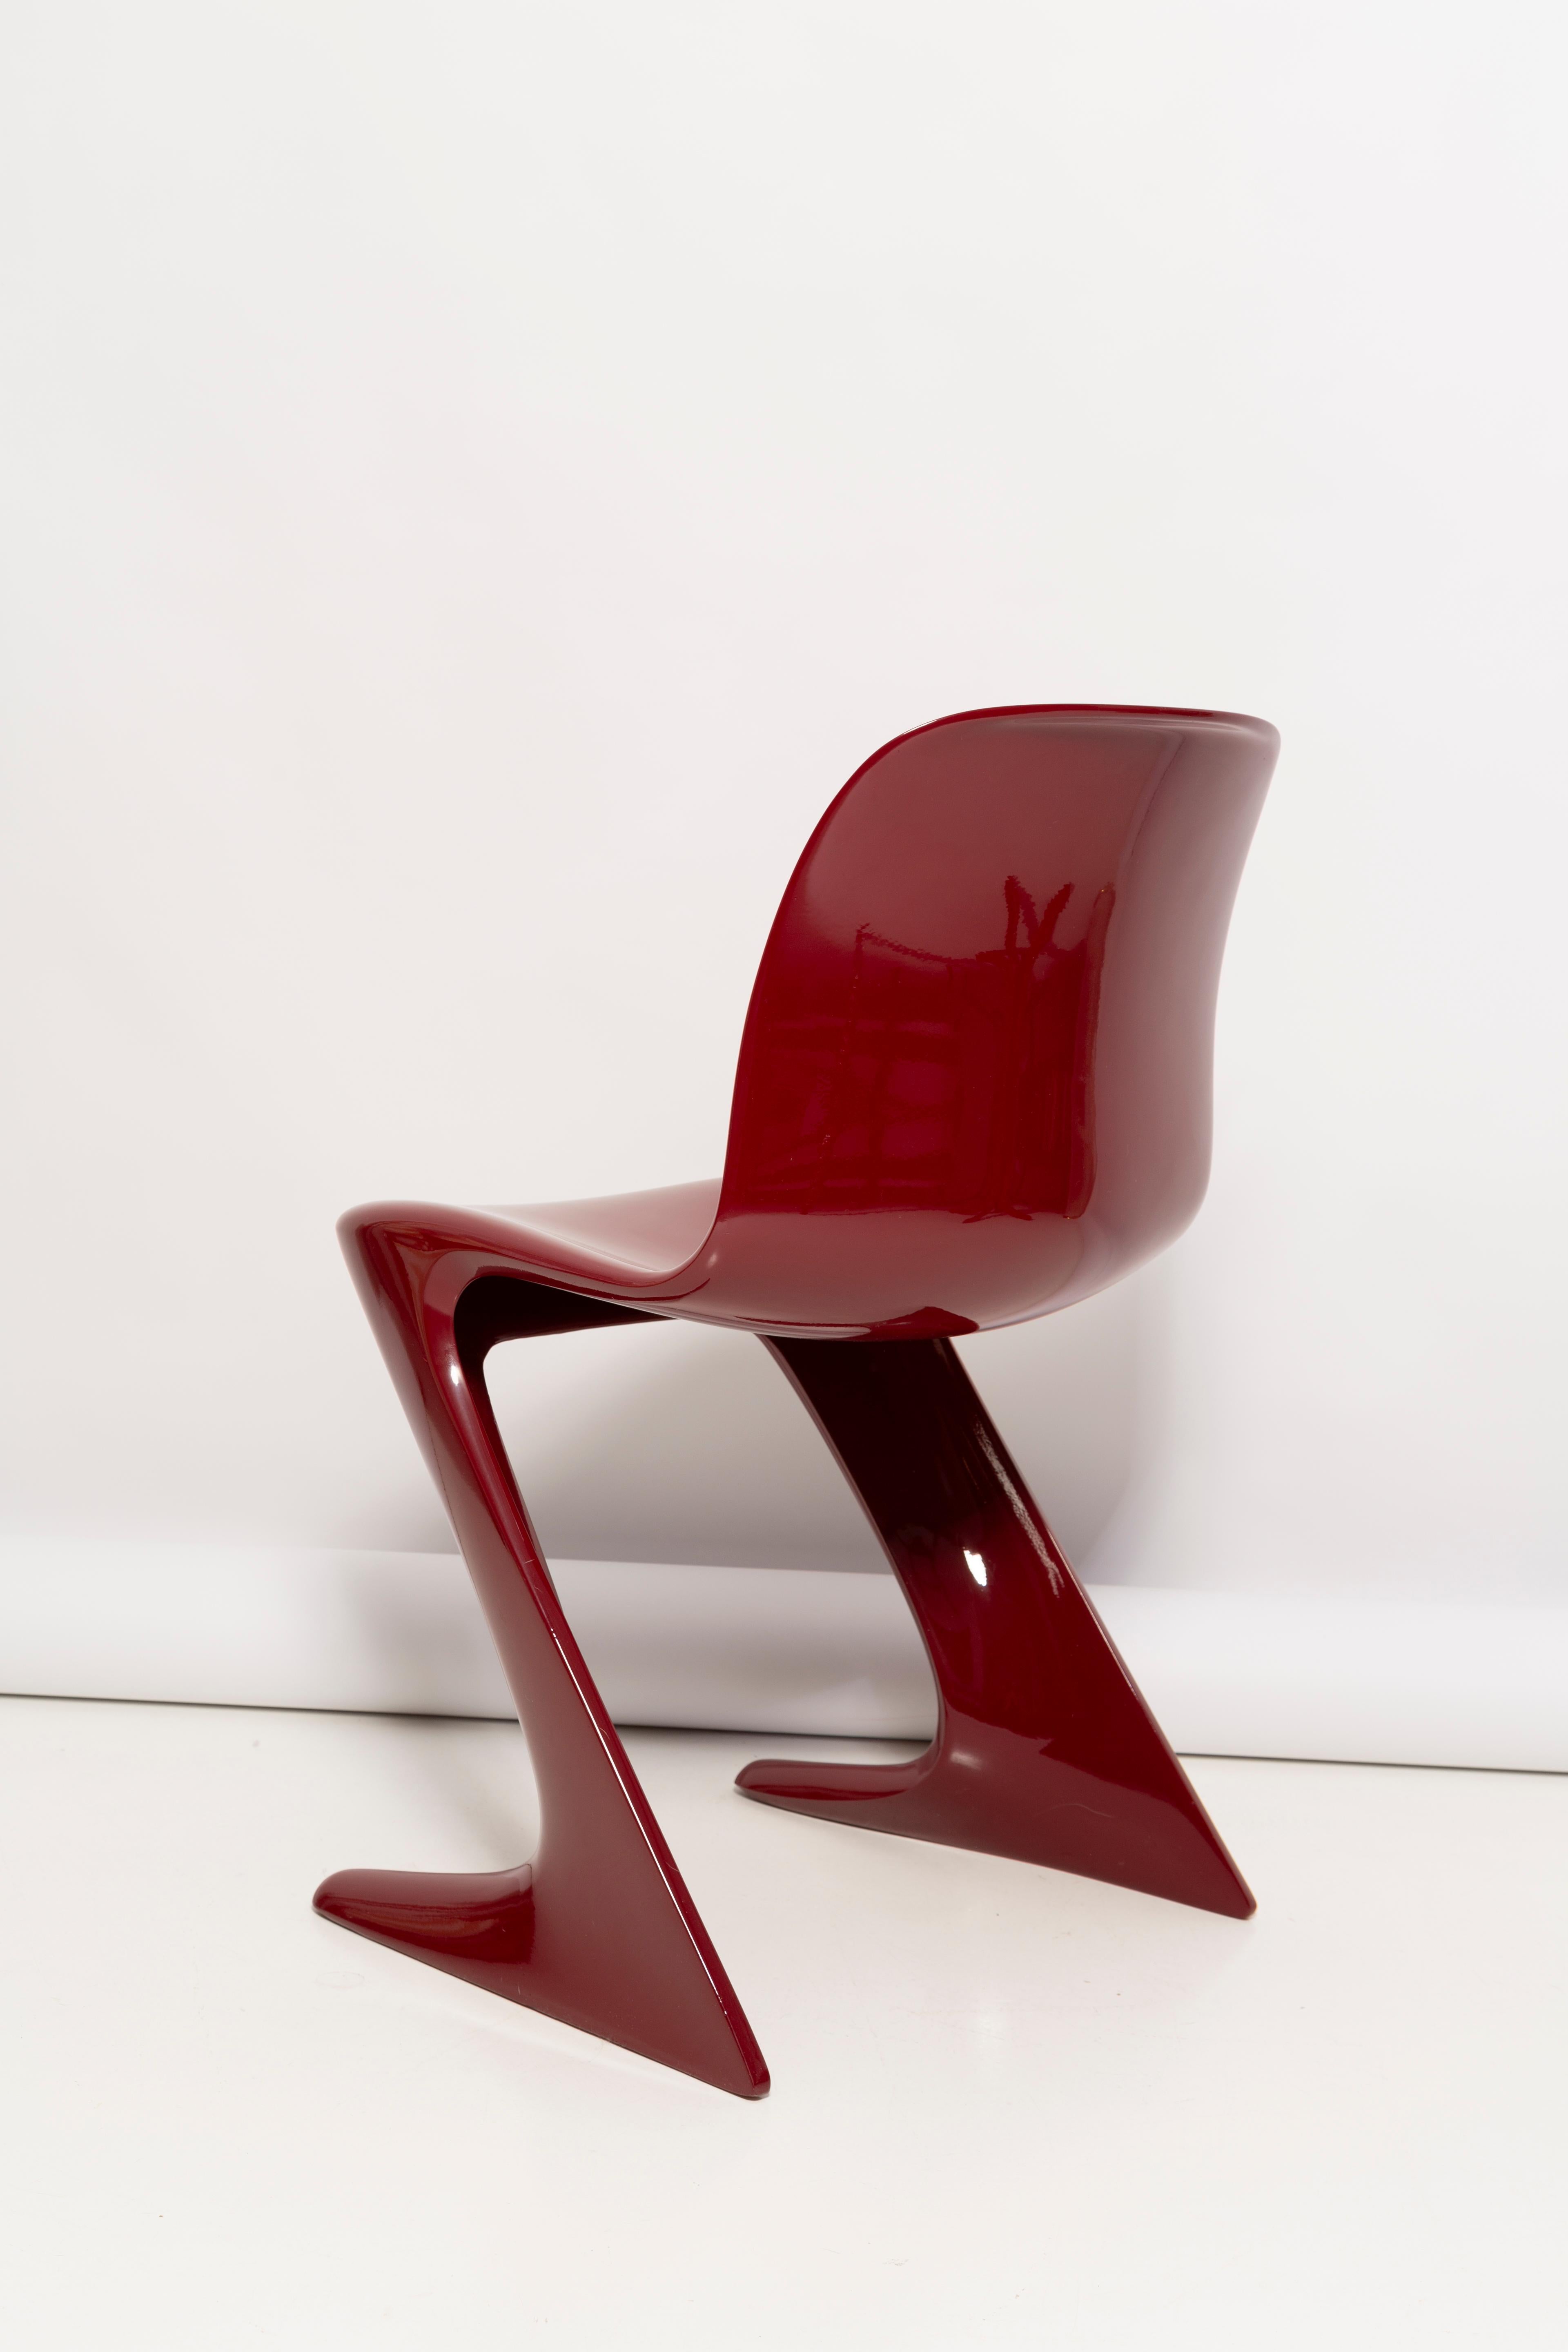 Set of Six Dark Red Wine Kangaroo Chairs Designed by Ernst Moeckl, Germany, 1968 For Sale 2